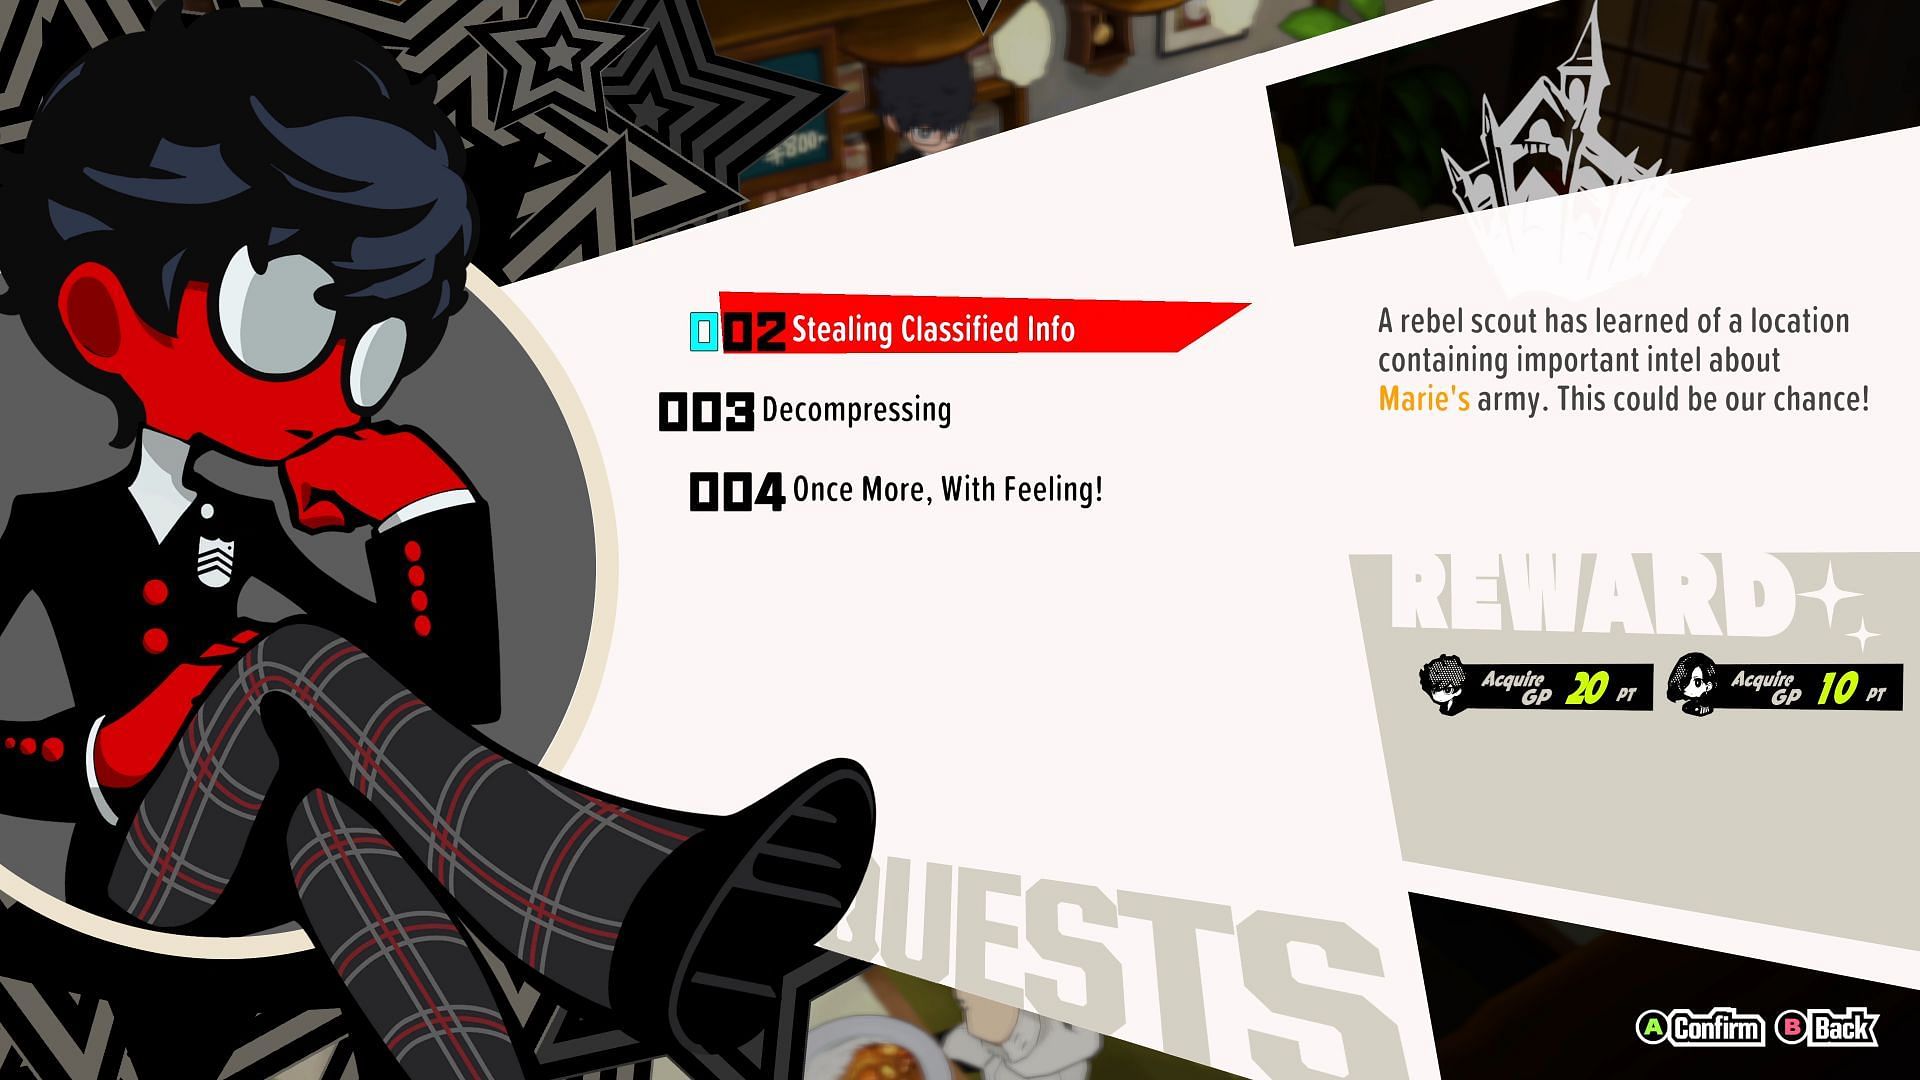 Completing side quests will provide a lot of GP (Image via Persona 5 Tactica)